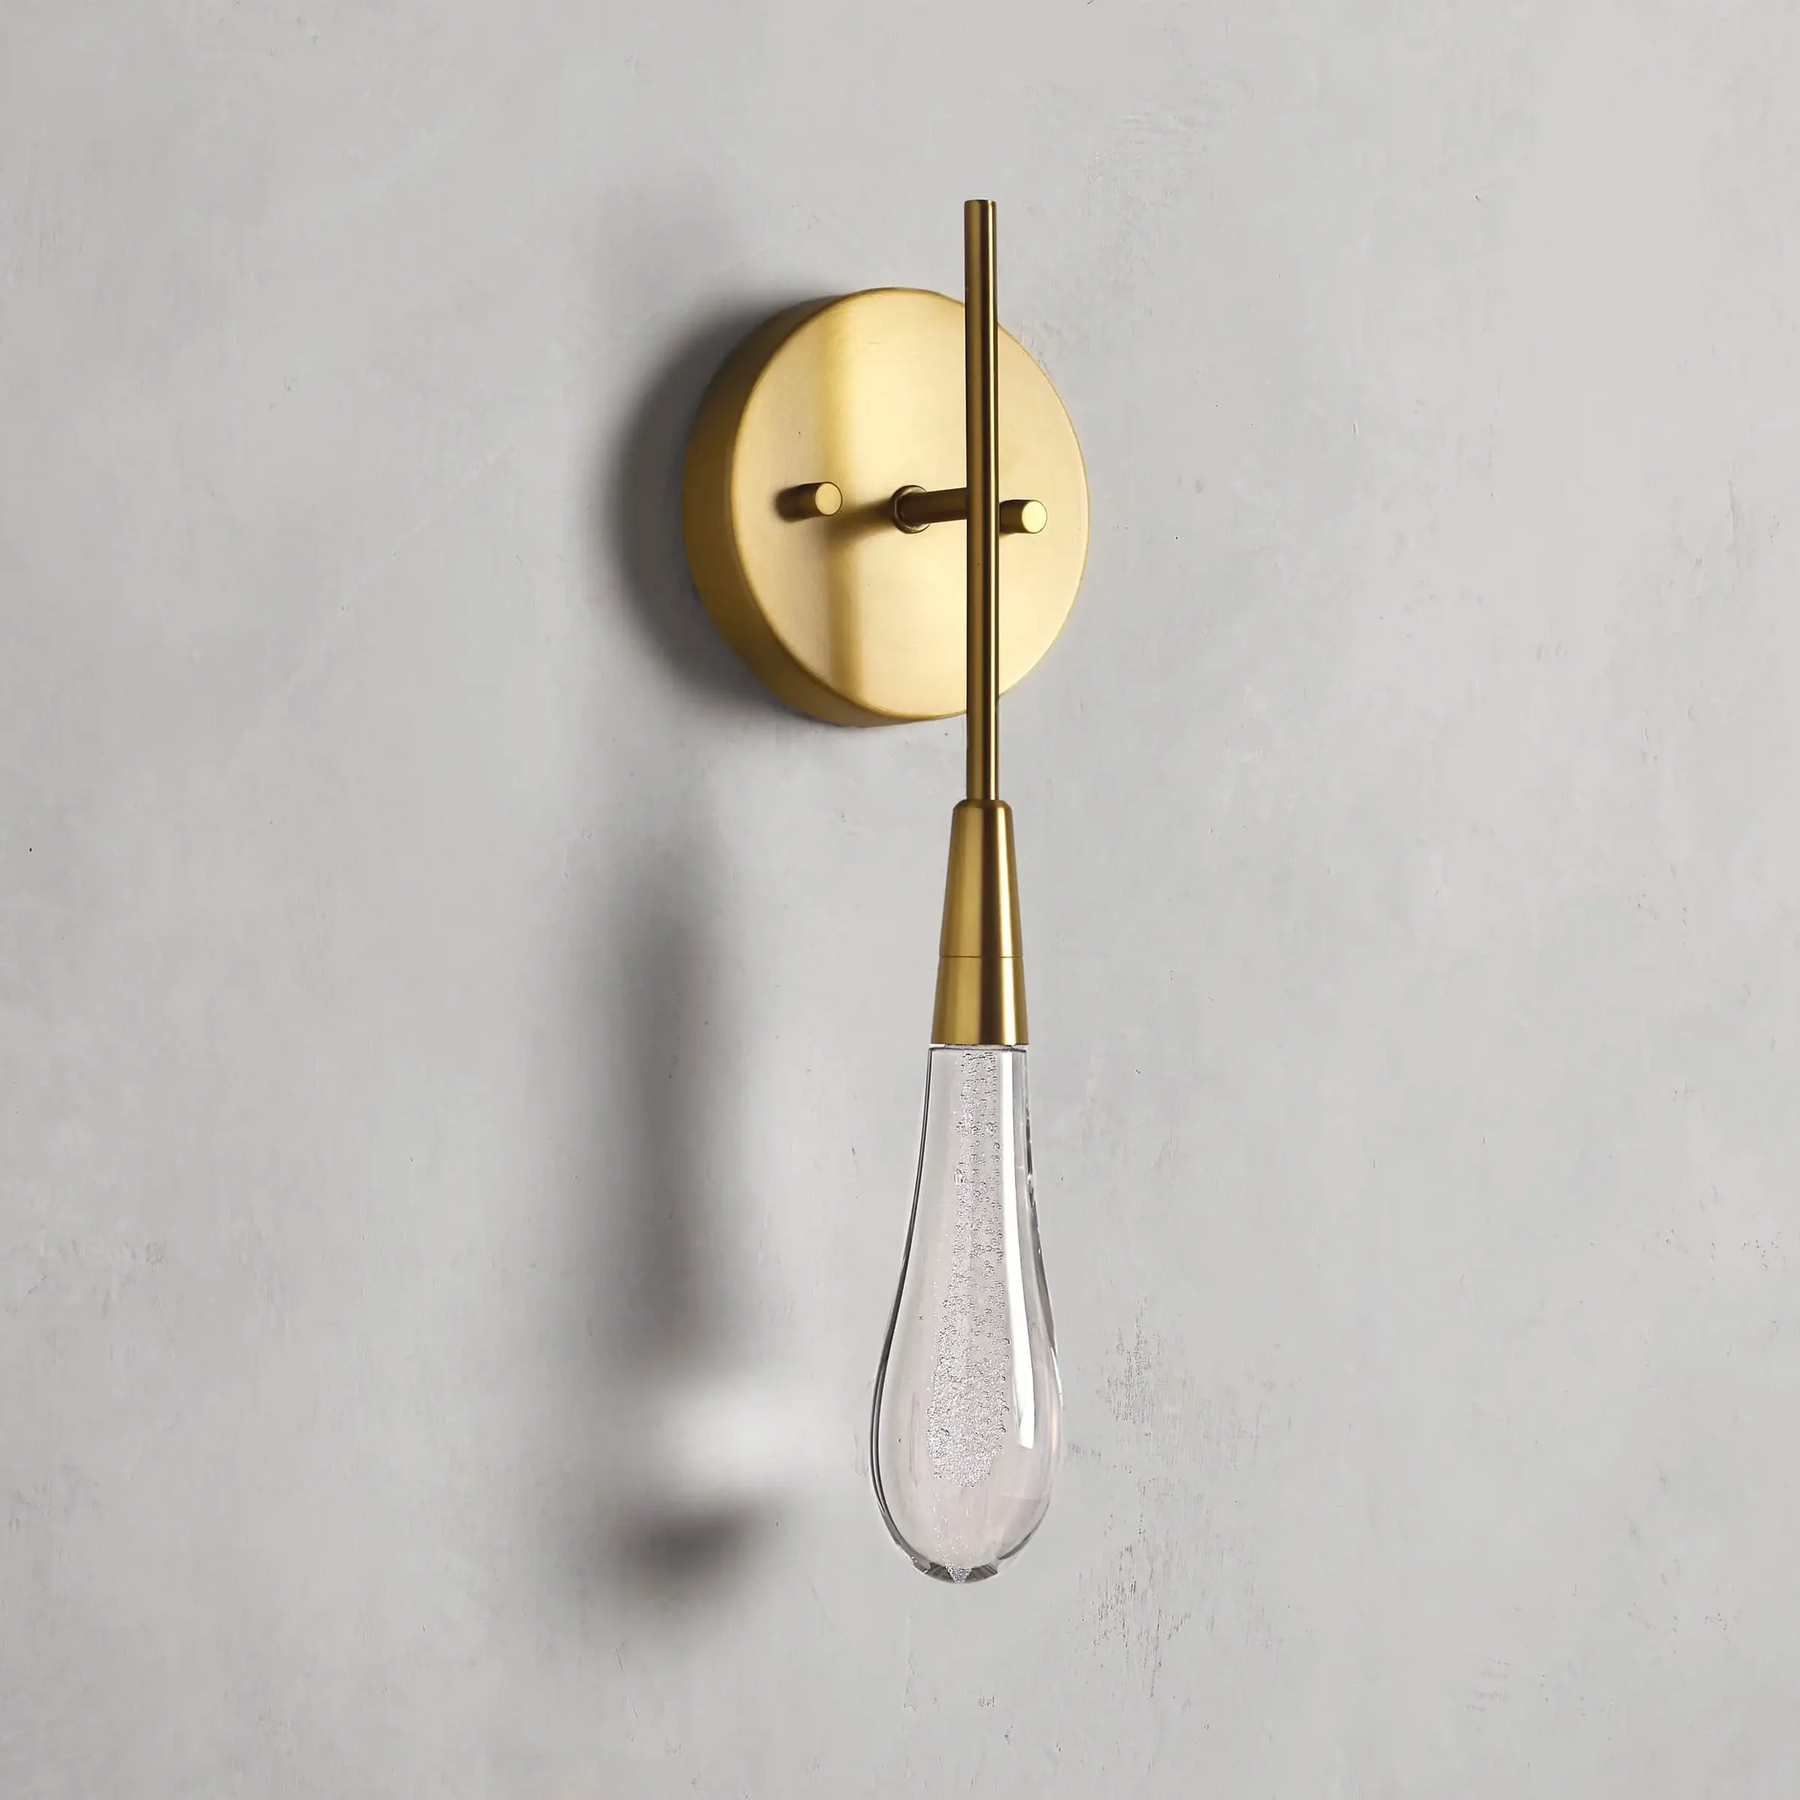 SOLITAIRE MODERN WALL SCONCE 5"W